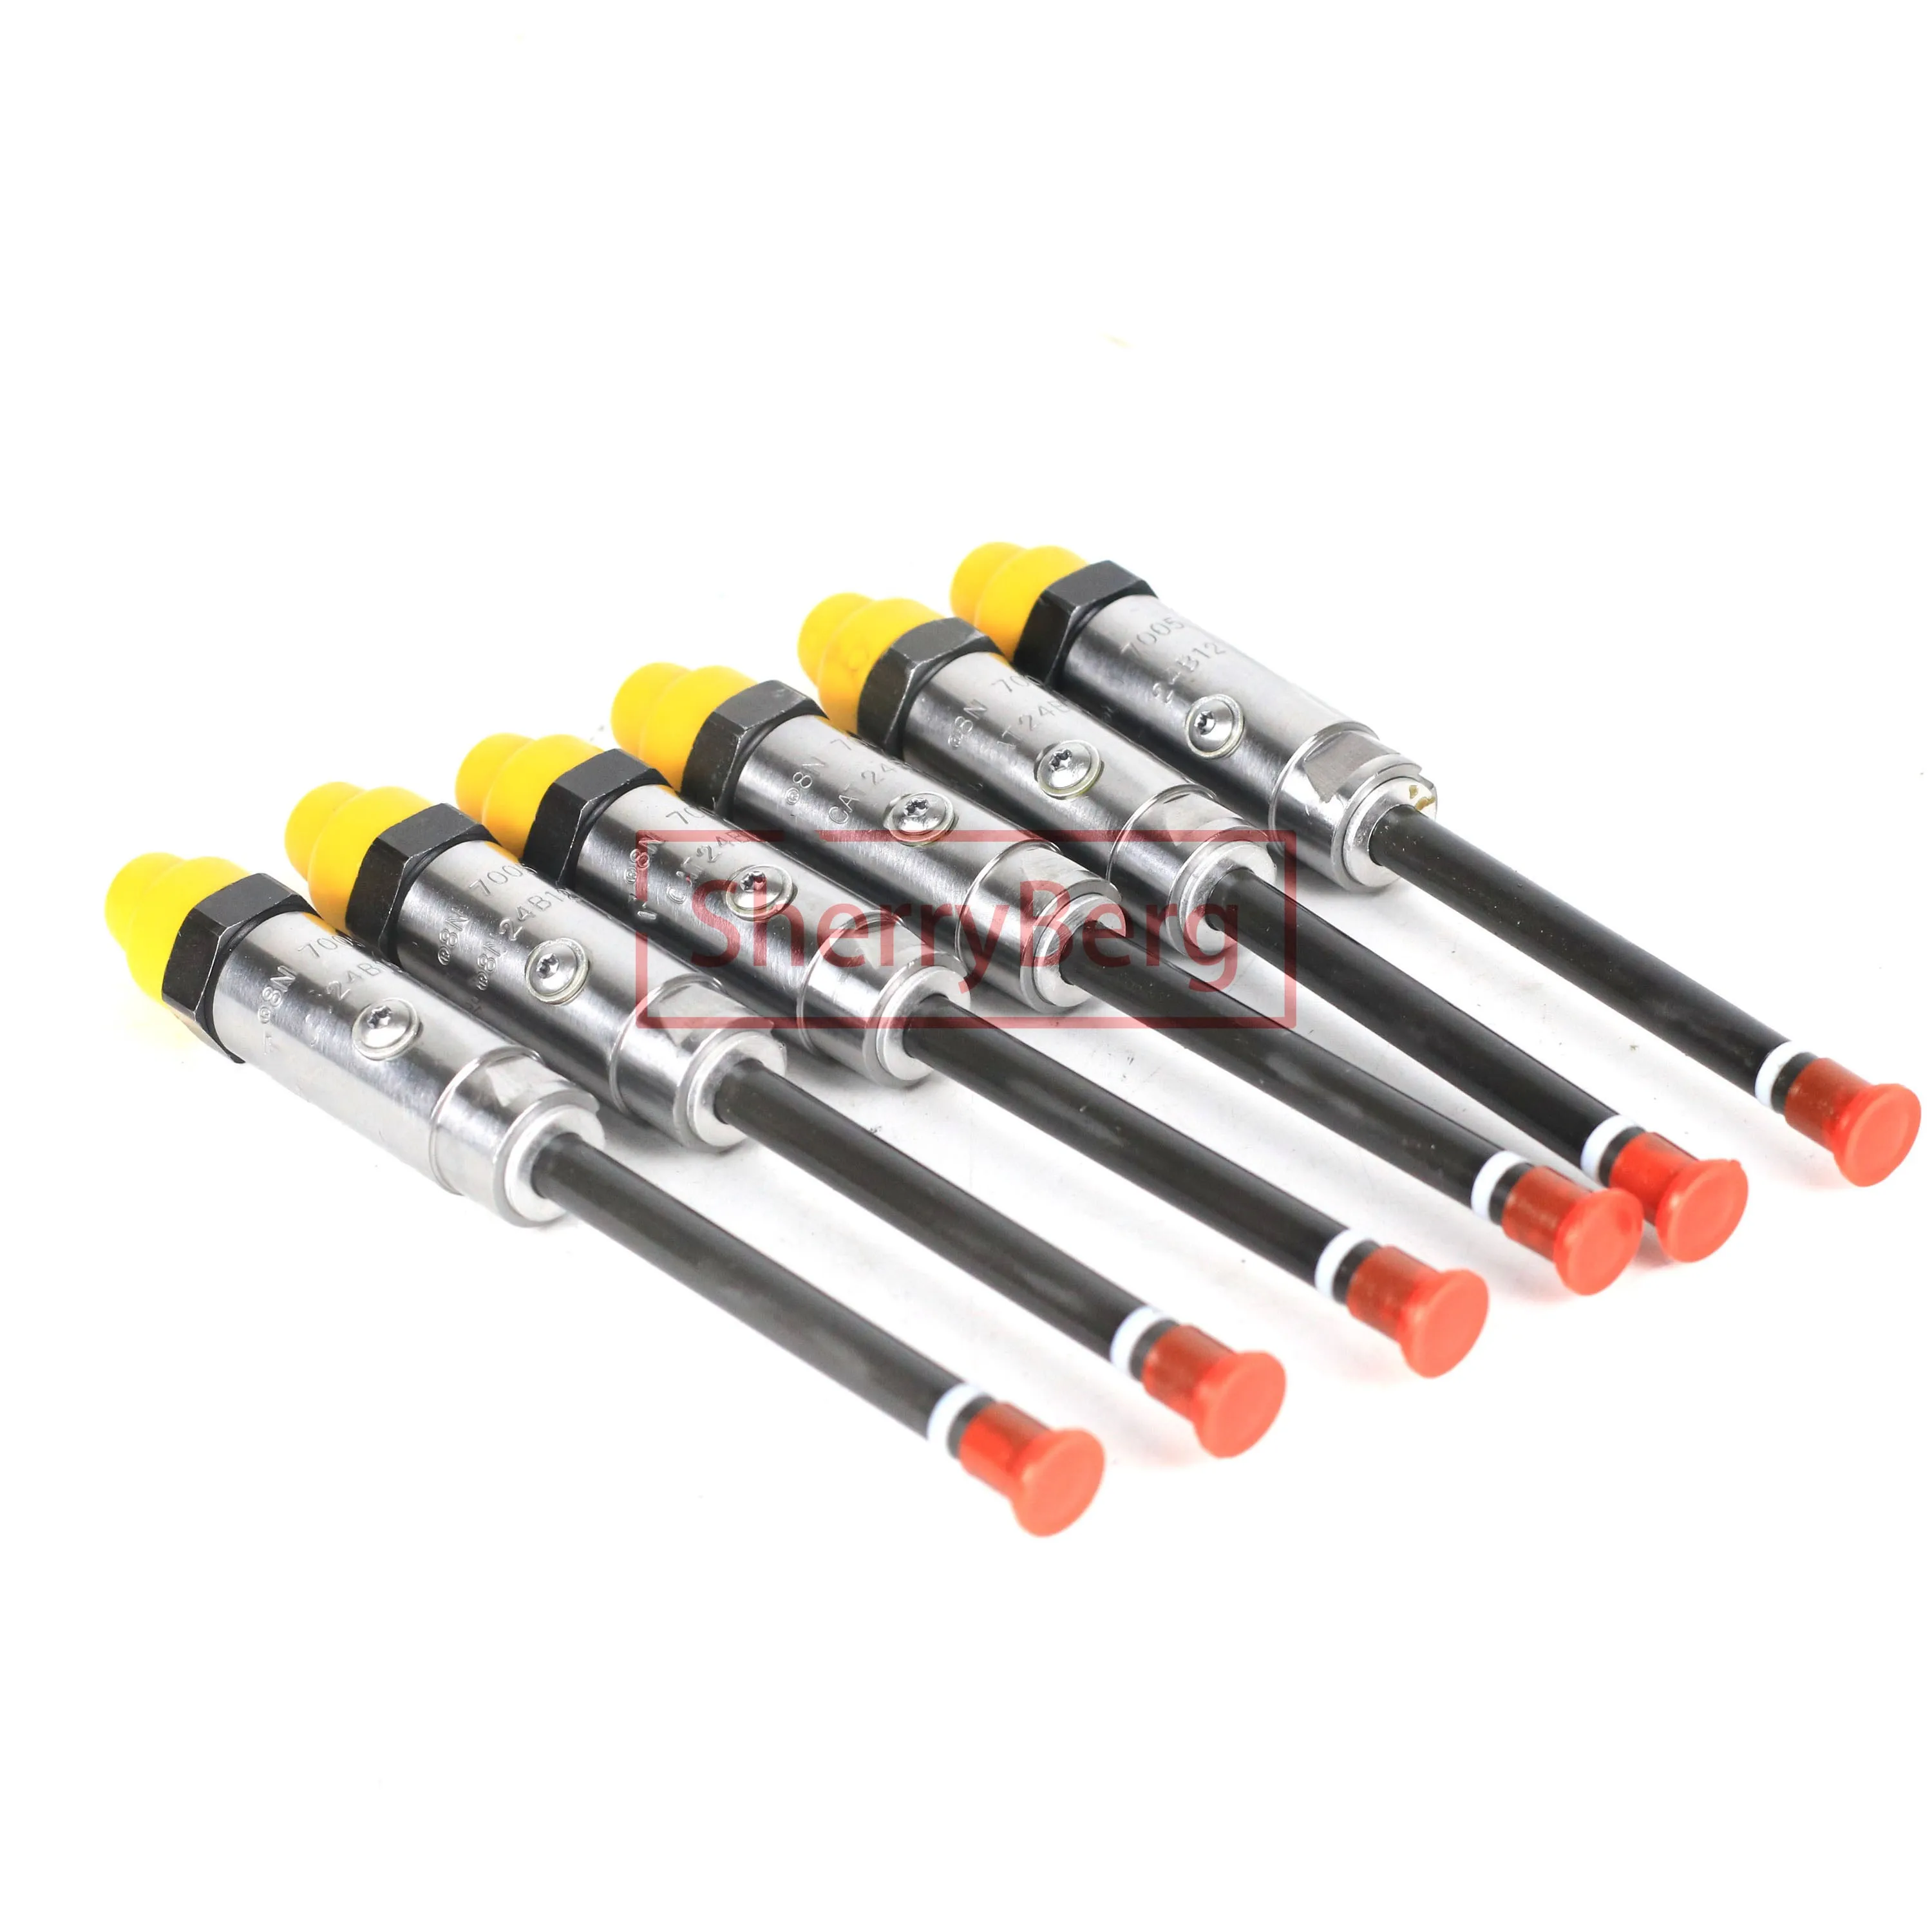 

SherryBerg 6pcs Brand New And Genuine Pencil Fuel Injector Nozzle 8N7005 8N-7005 For Caterpillar 330 3304 3306 Engine Excavator